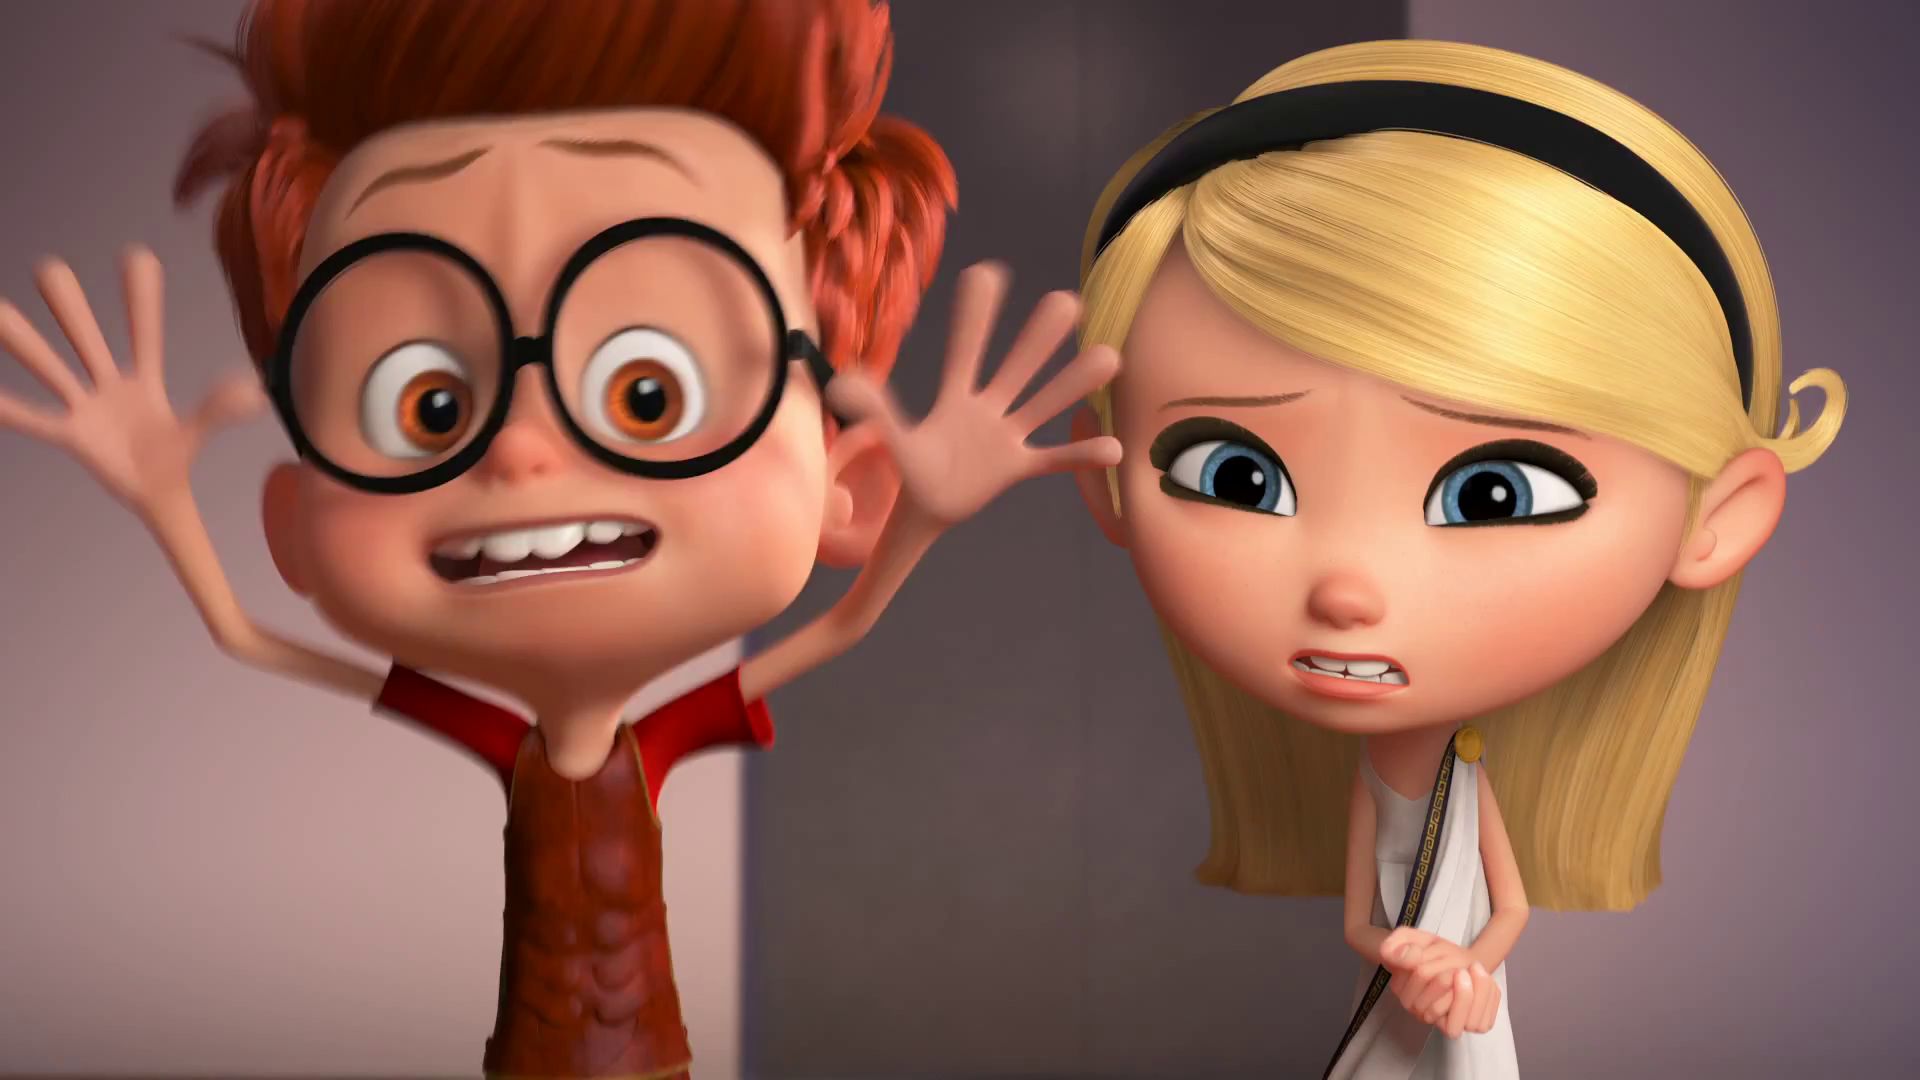 mr peabody sherman HD wallpapers, backgrounds